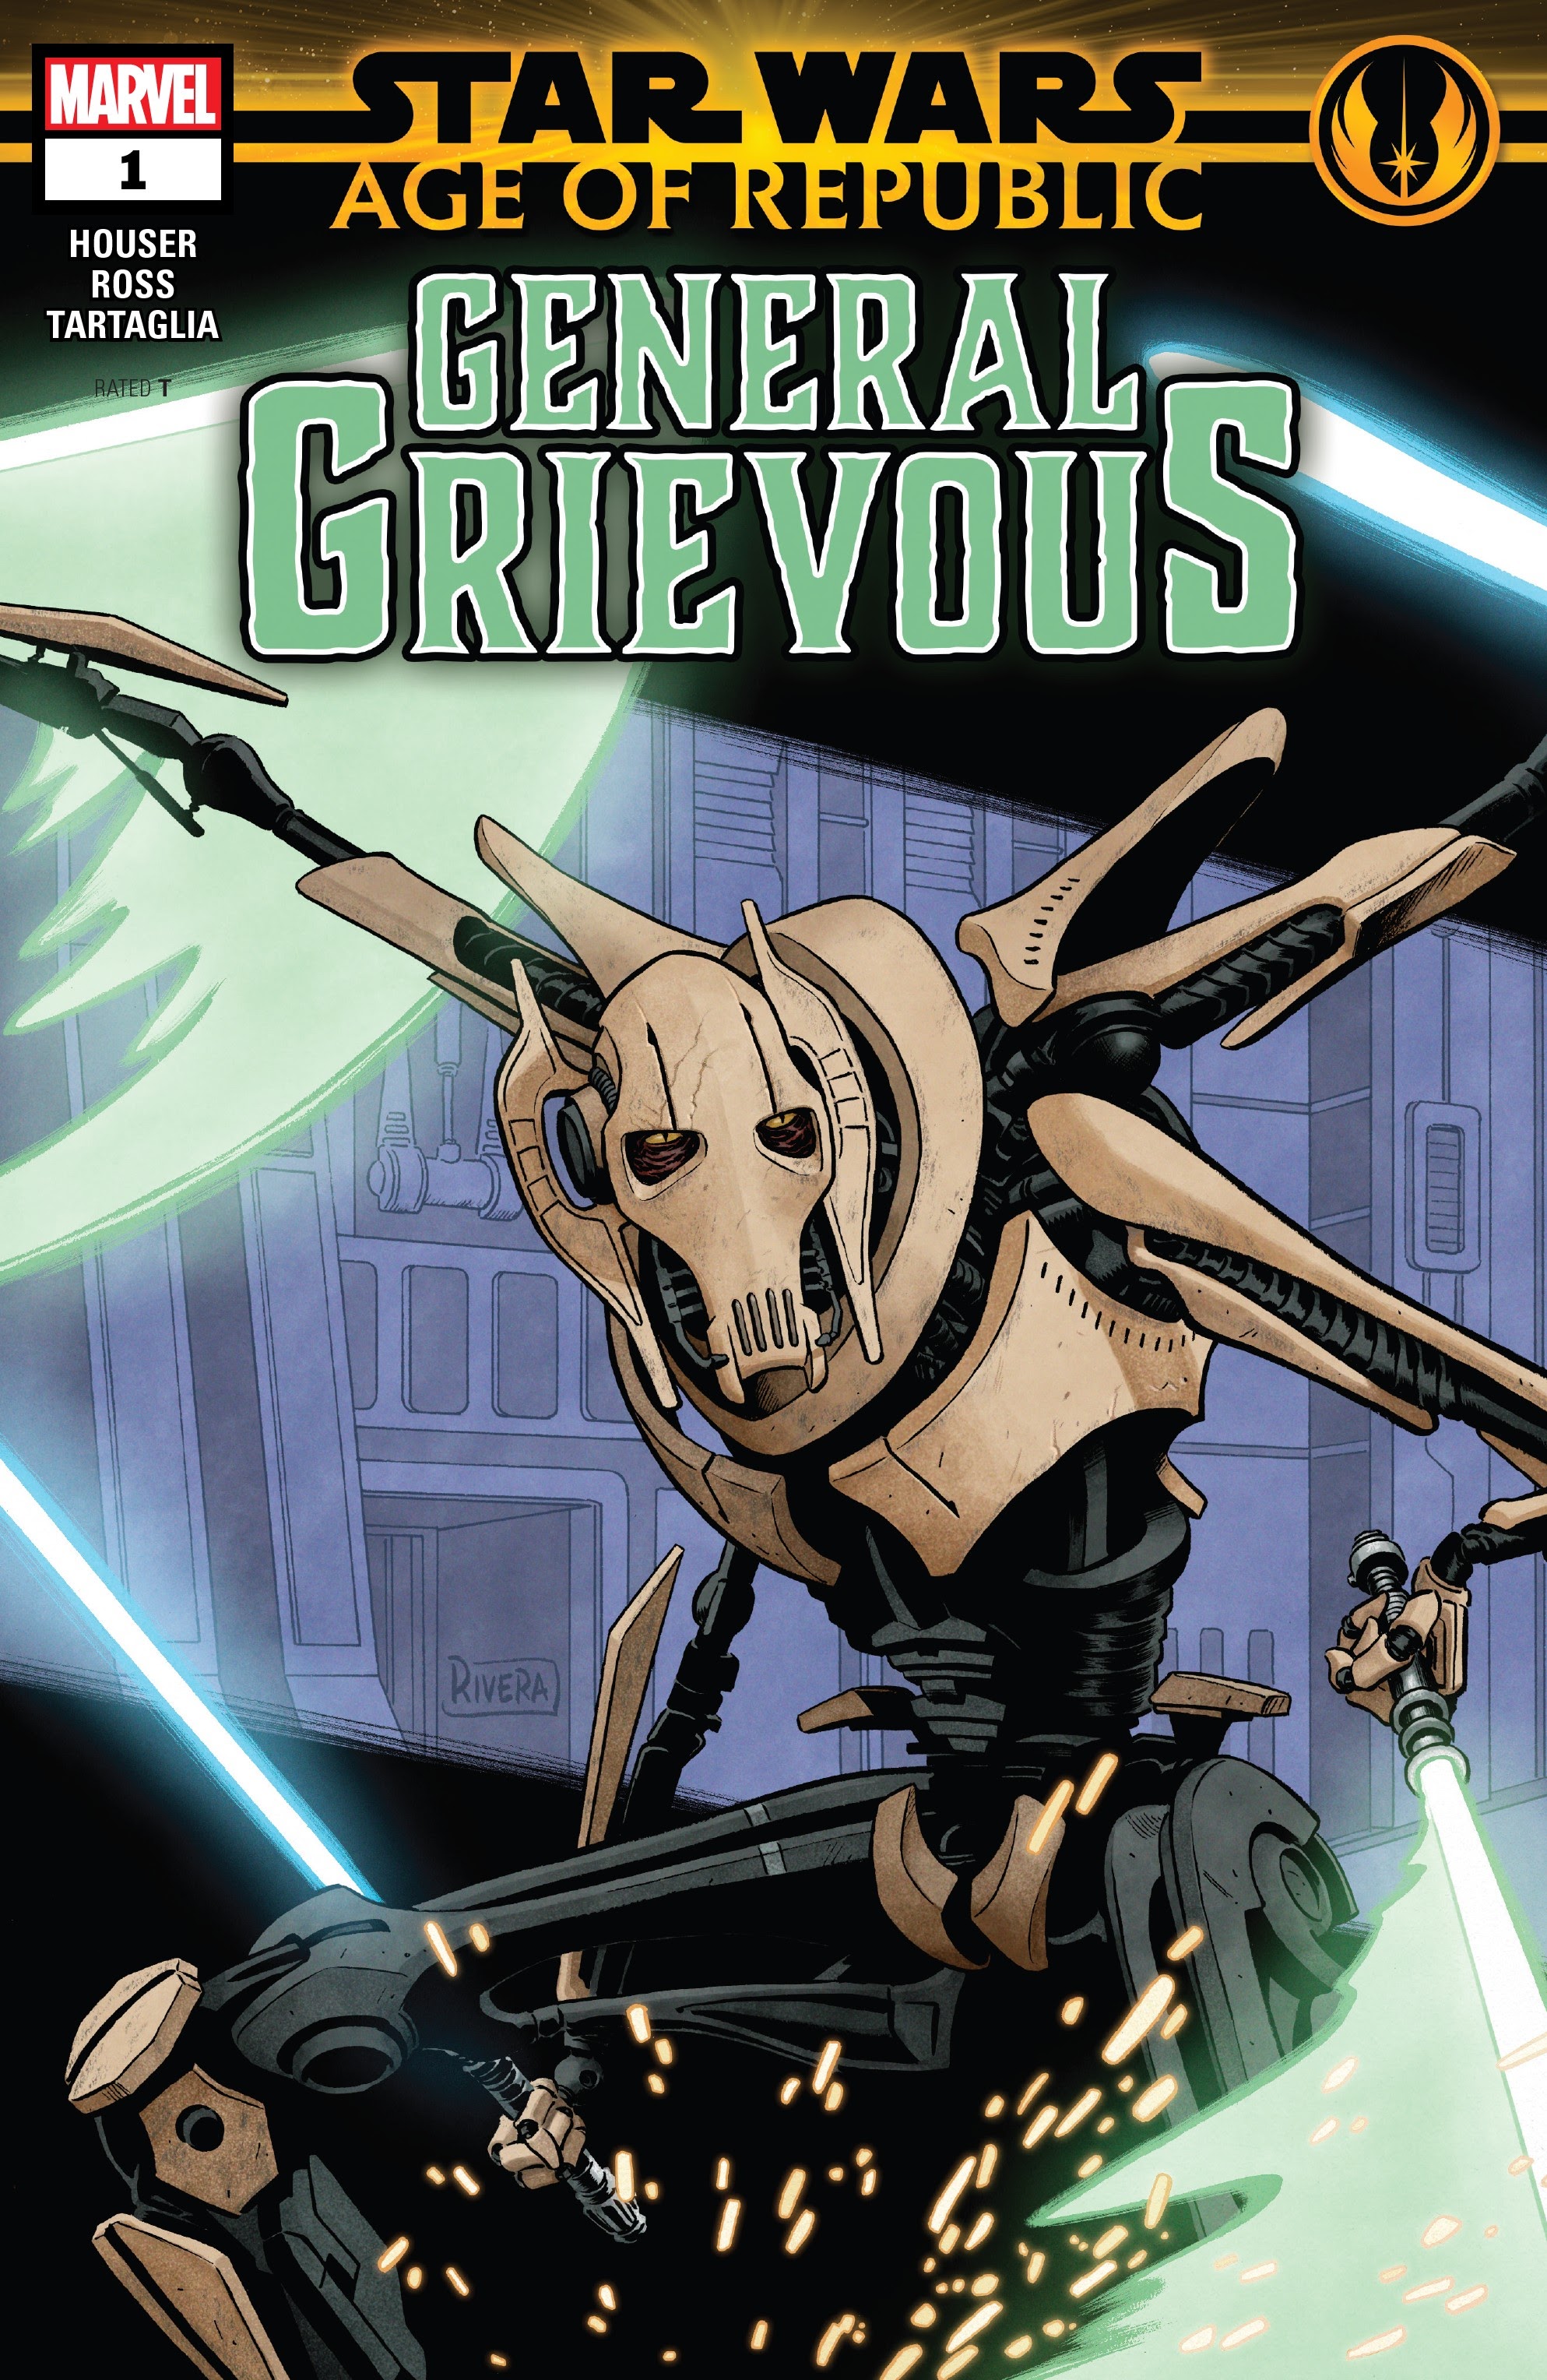 Read online Star Wars: Age of Republic - General Grievous comic -  Issue # Full - 1